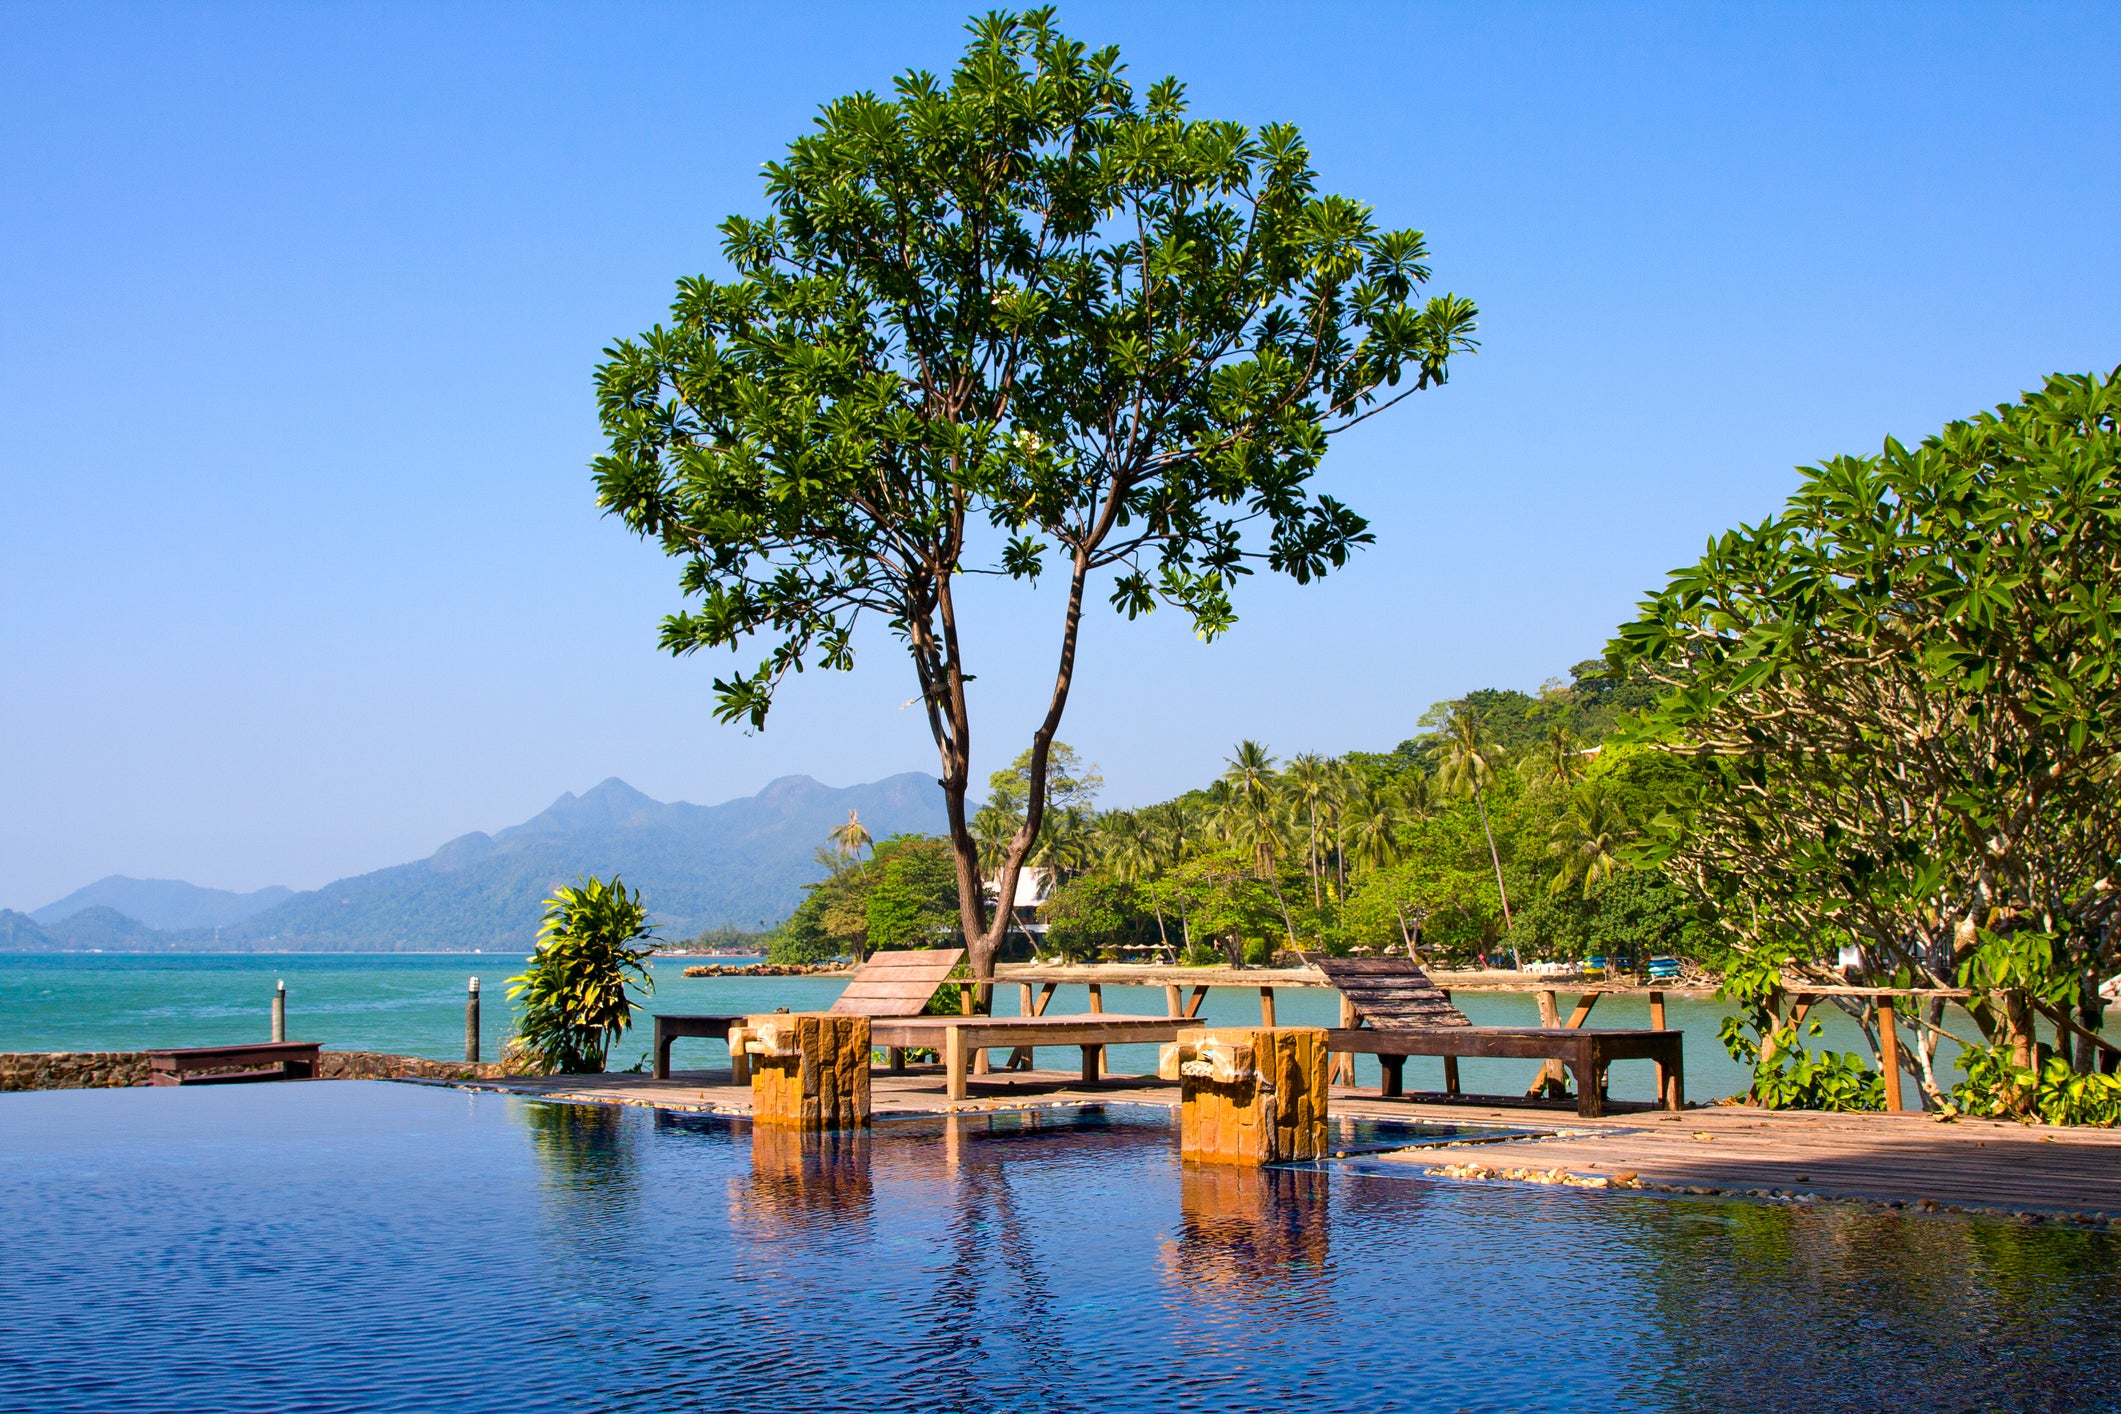 Thailand is not short of secluded island stays